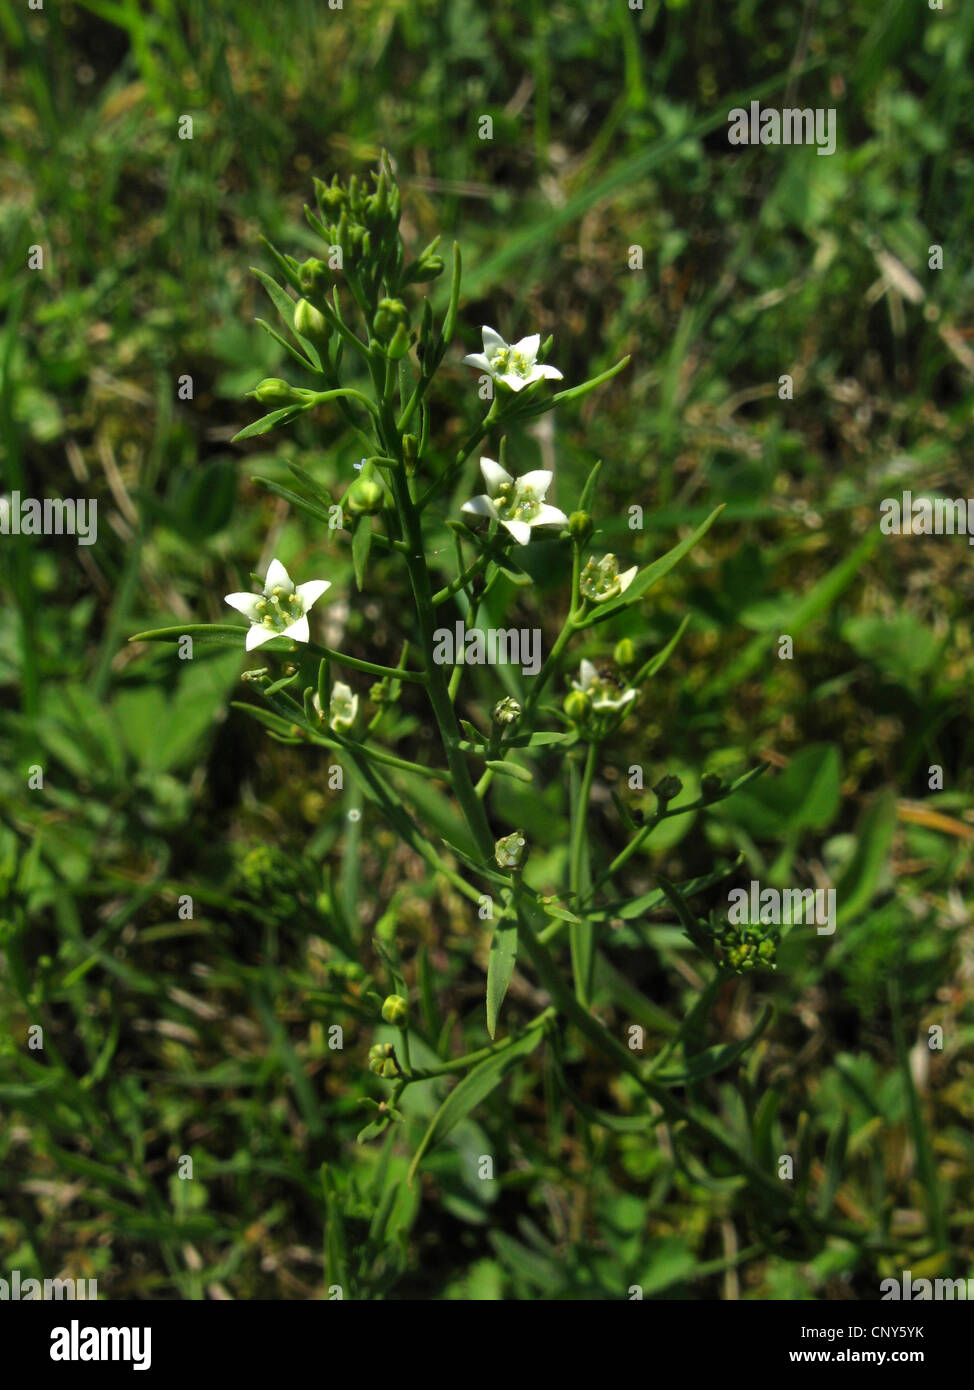 Thesium linophyllon (Thesium linophyllon), blooming, Germany, Thuringia Stock Photo